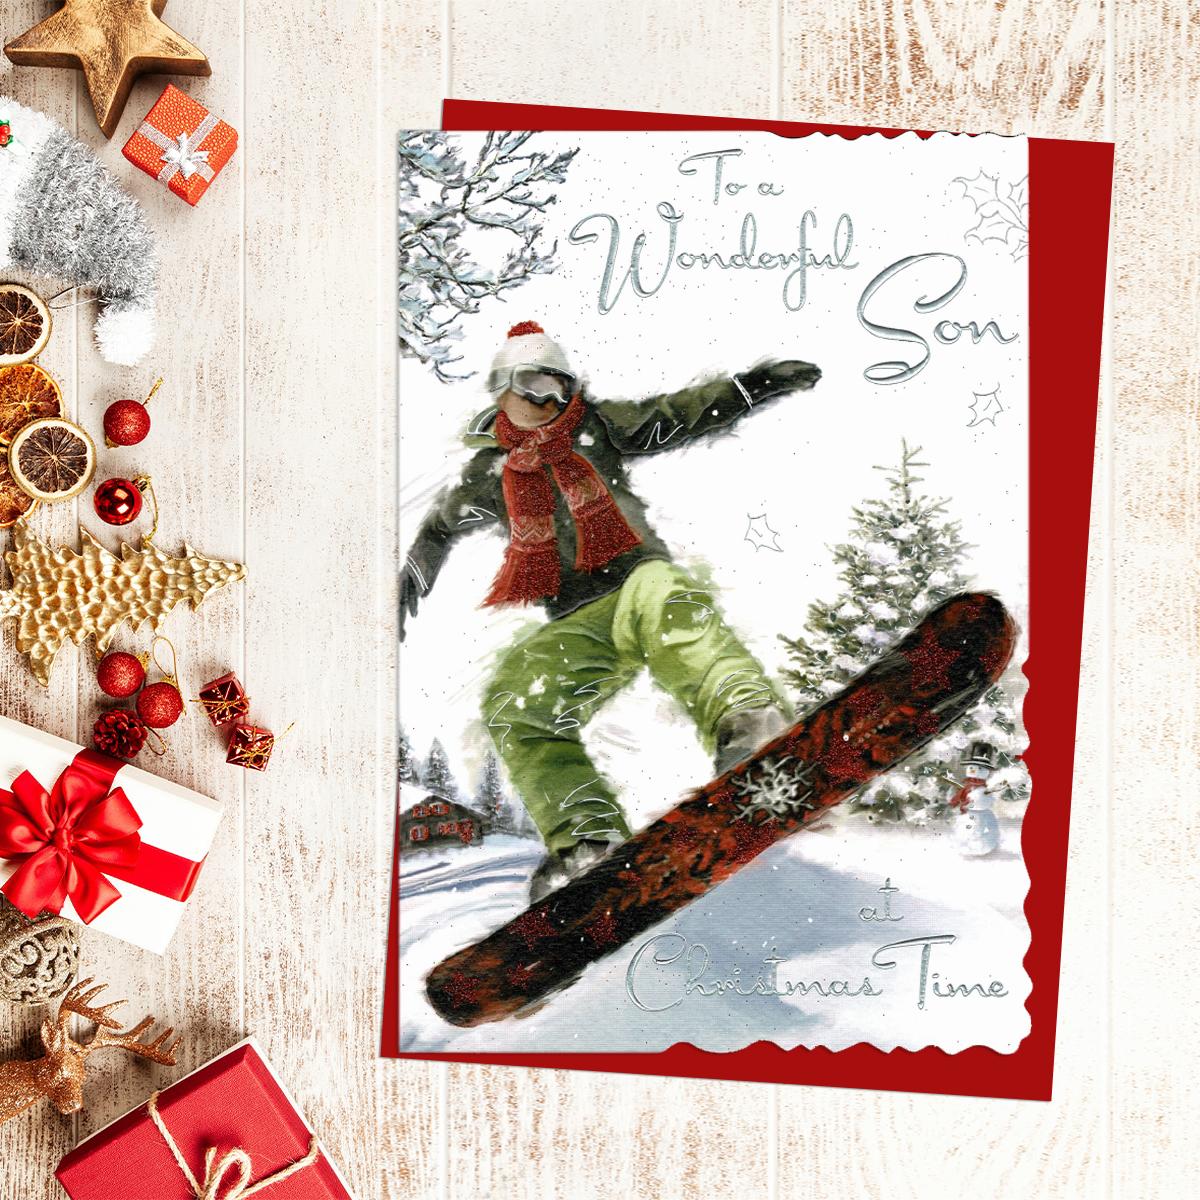 To A Wonderful Son At Christmas Time. A Young Man Snowboarding. Finished With Silver Foil lettering And Red Glitter. Complete With Red Envelope